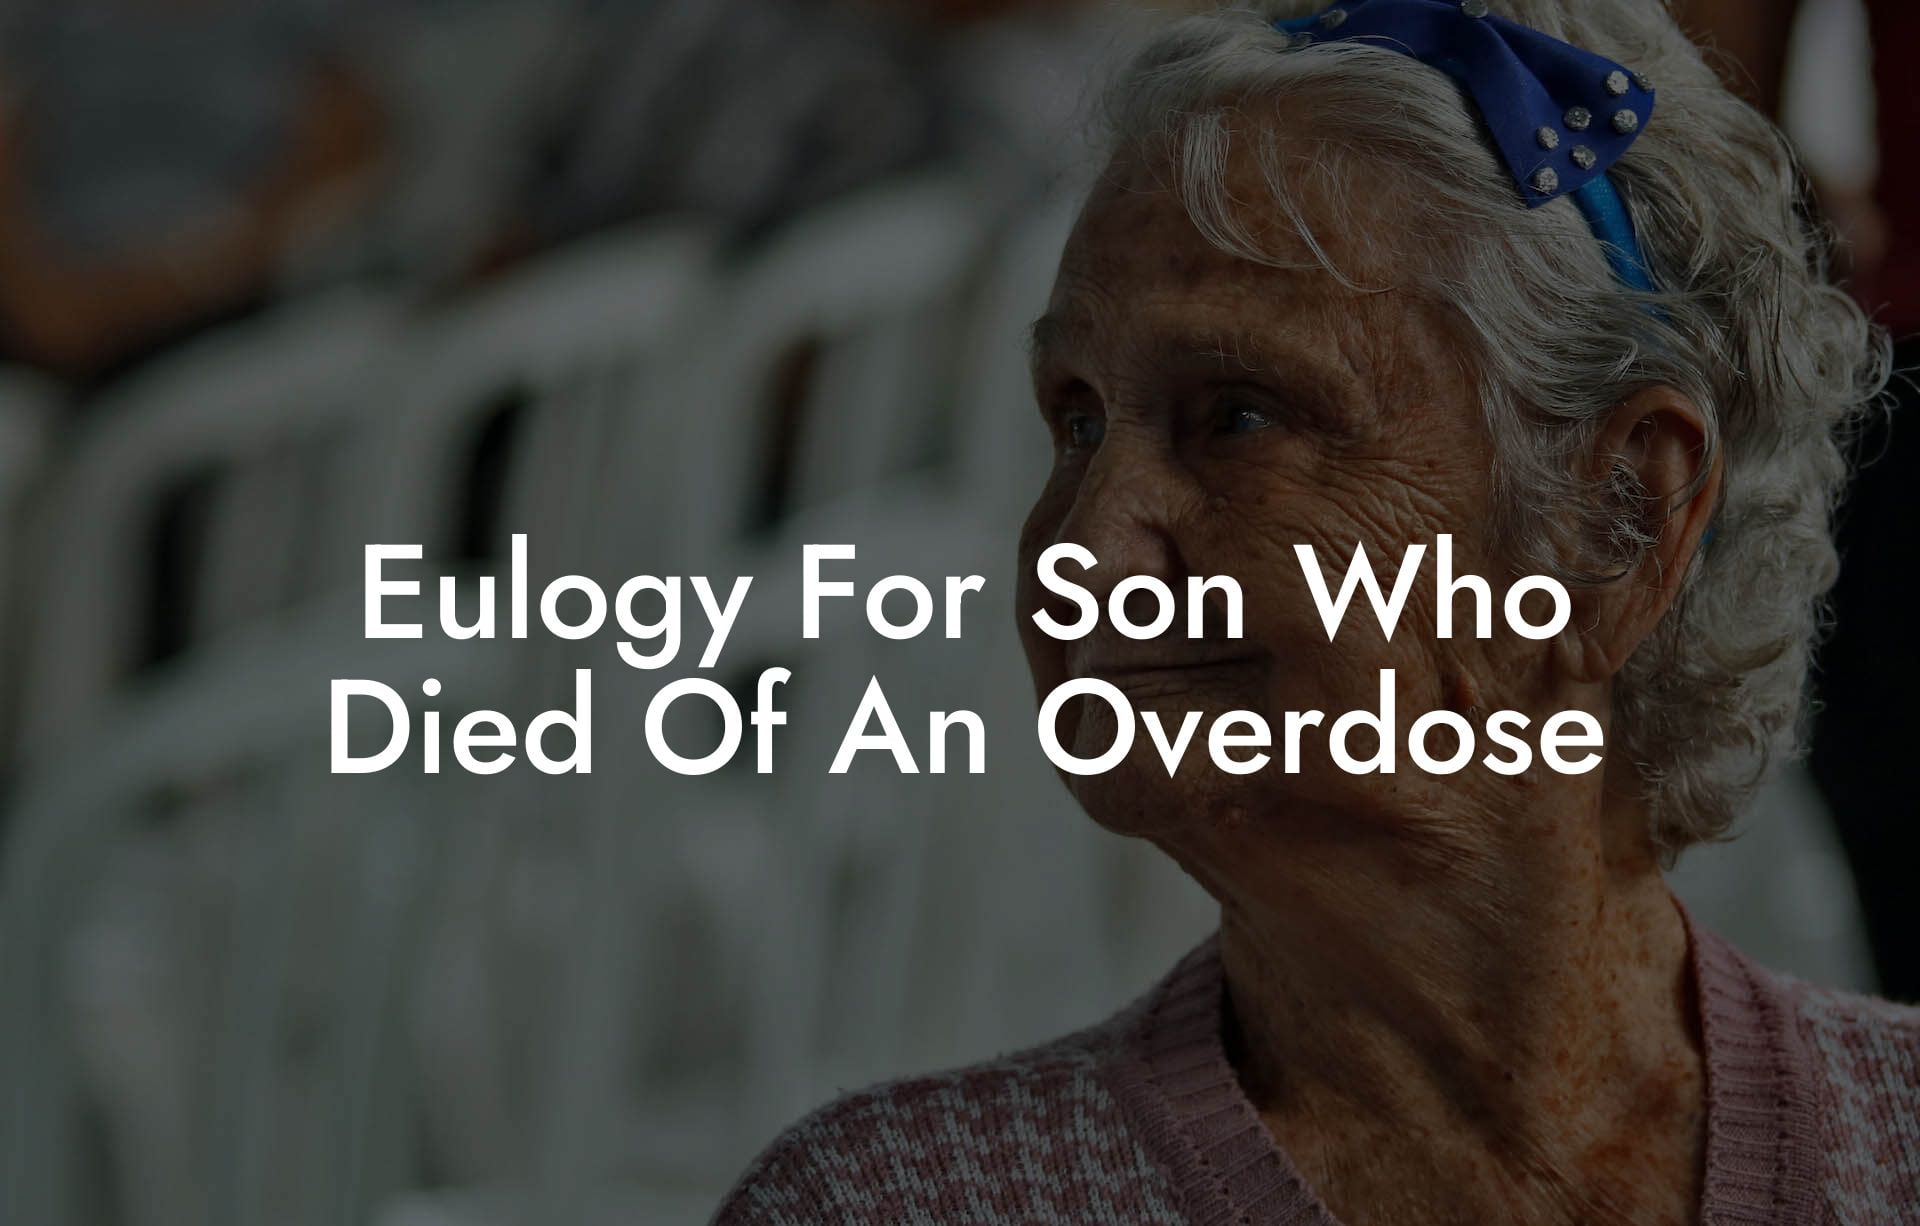 Eulogy For Son Who Died Of An Overdose